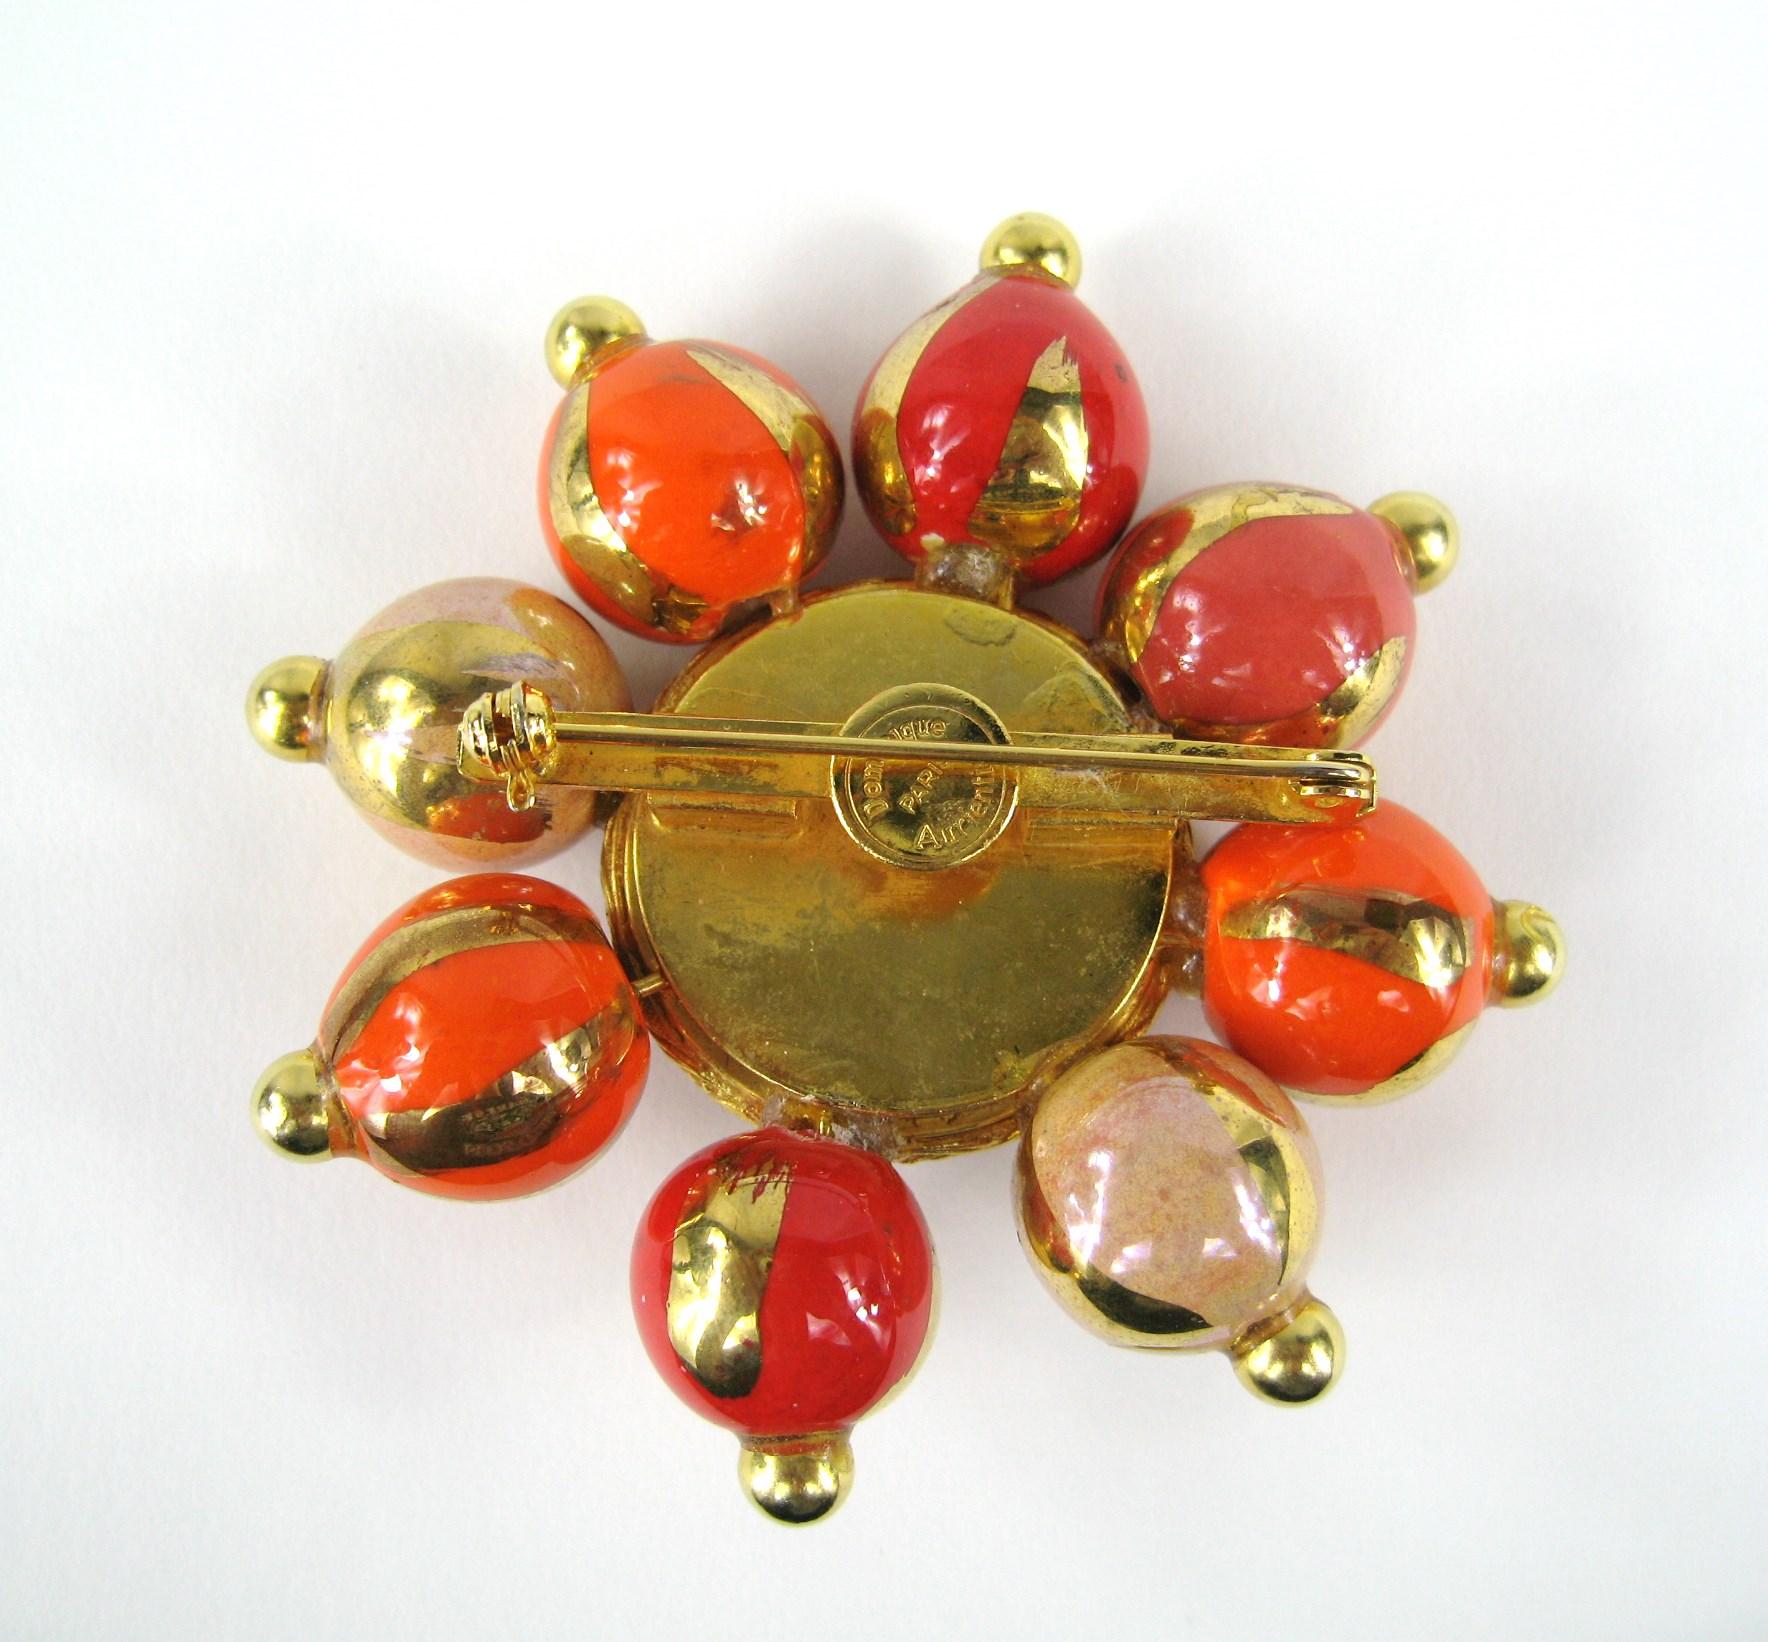 Women's Dominique Aurientis French Gripoix Glass Painted Brooch Pin New Never worn 1980s